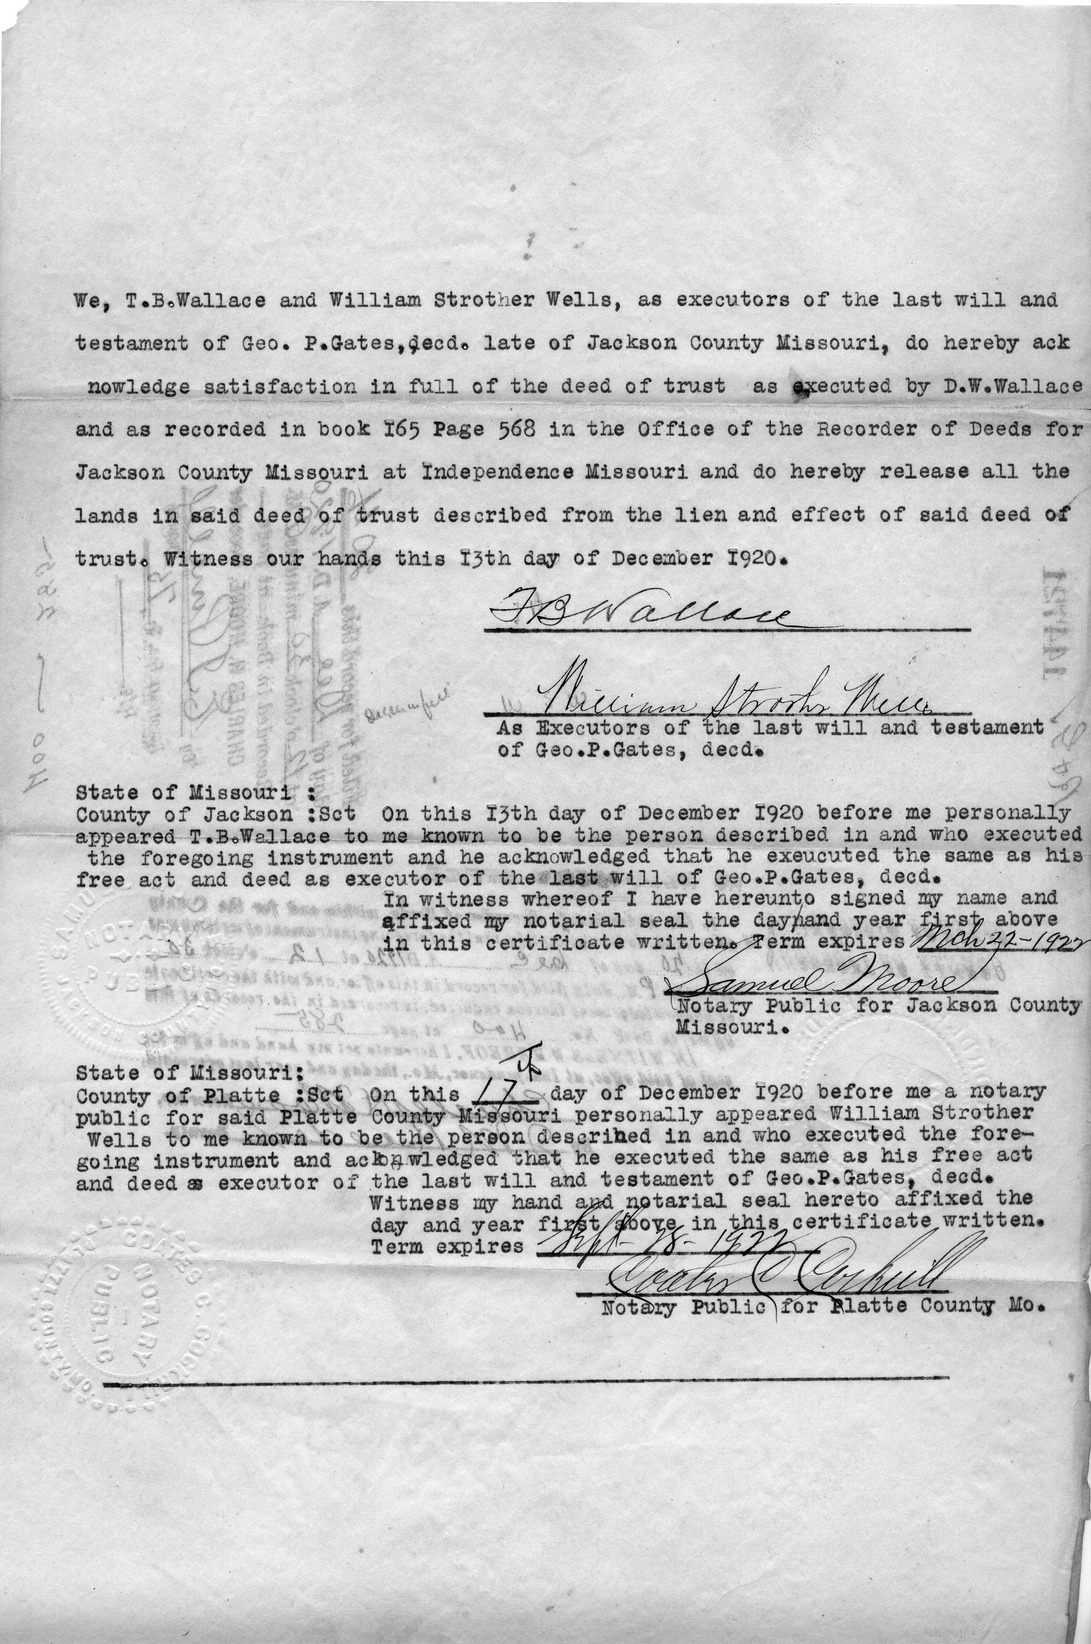 Affidavit of T. B. Wallace and William Strother Wells